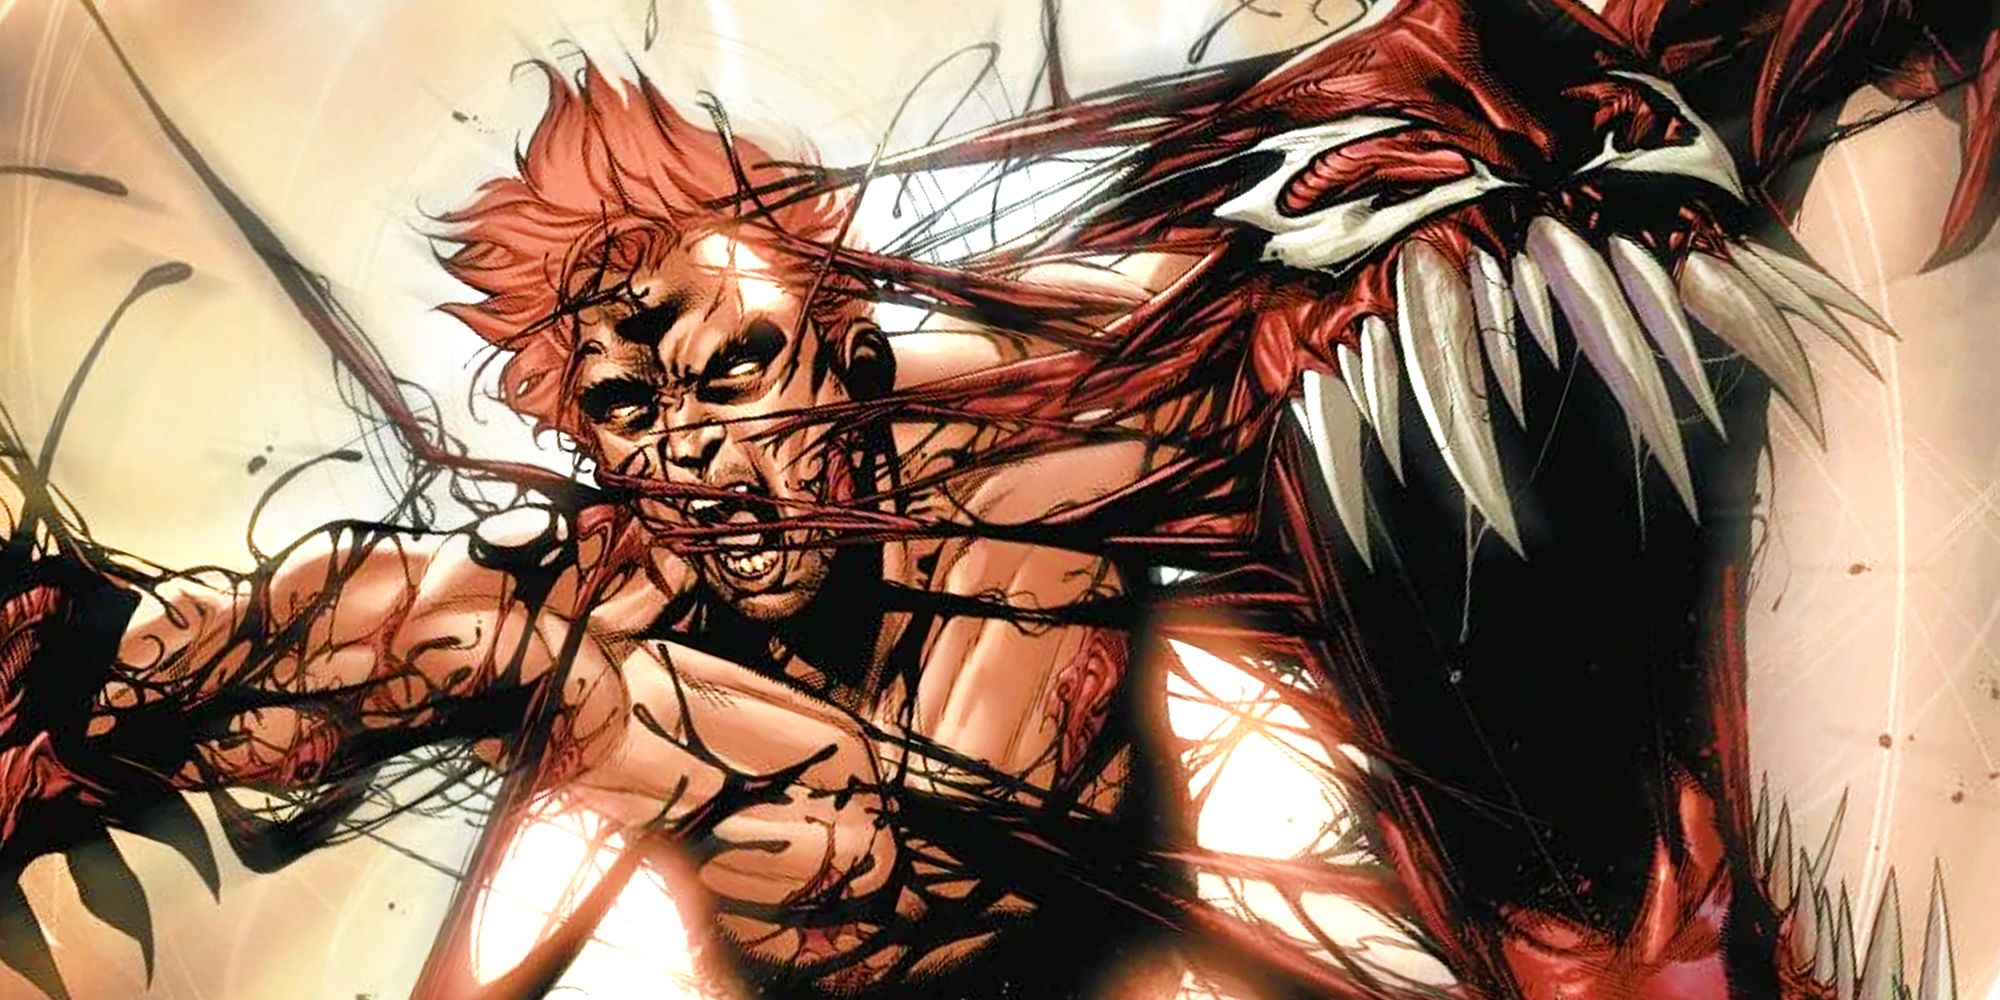 Carnage and Cletus Kasady in Marvel Comics